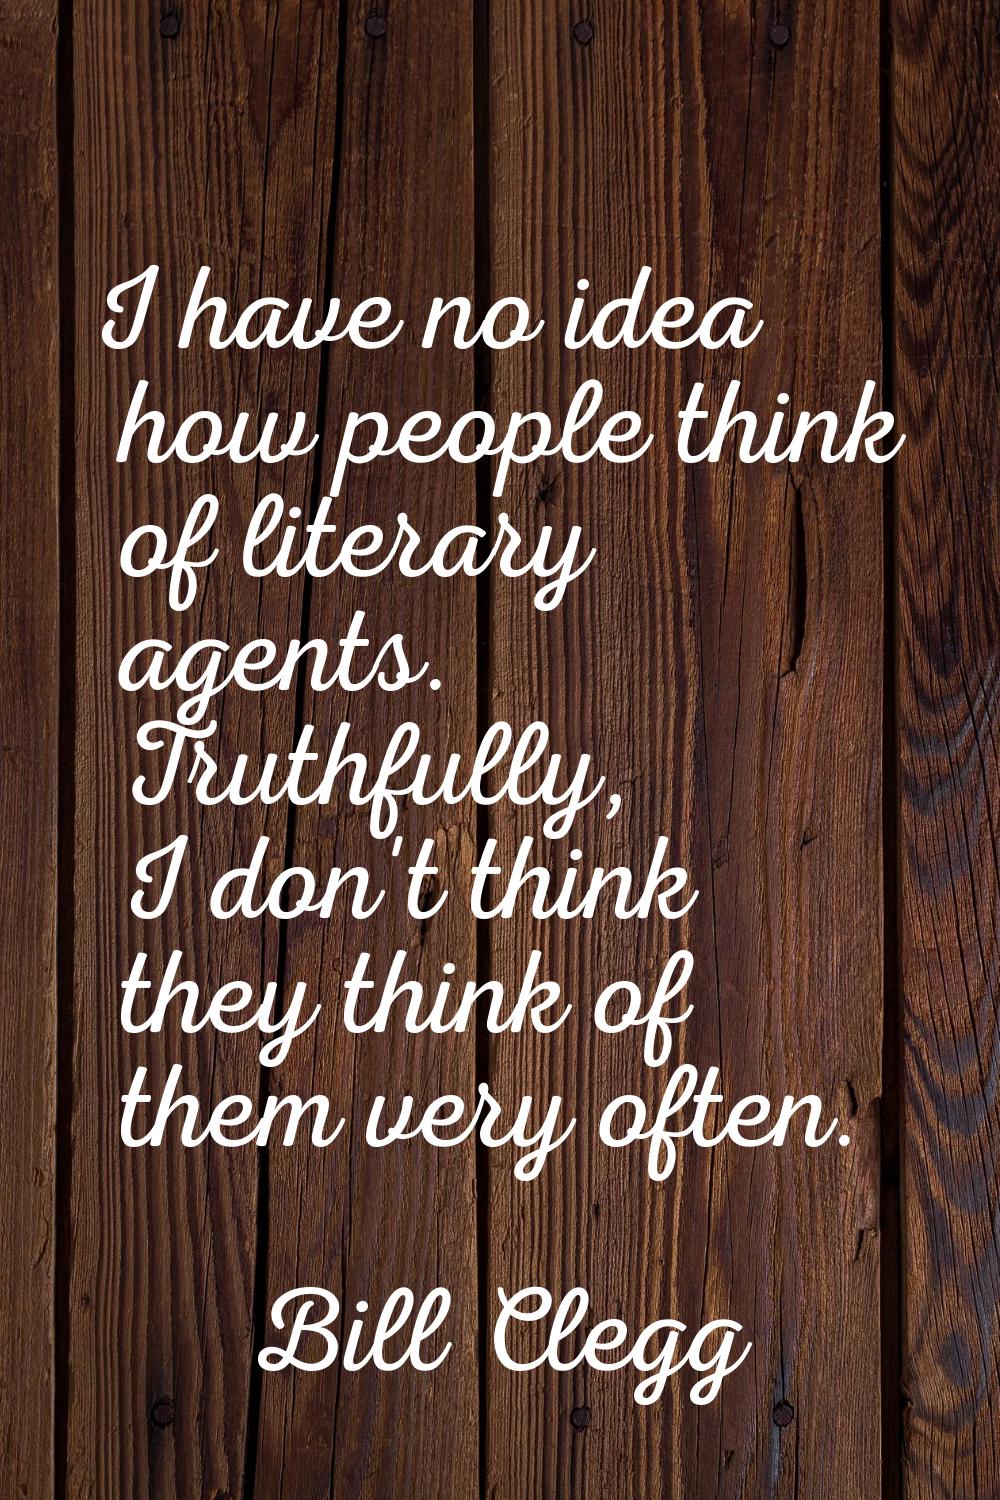 I have no idea how people think of literary agents. Truthfully, I don't think they think of them ve